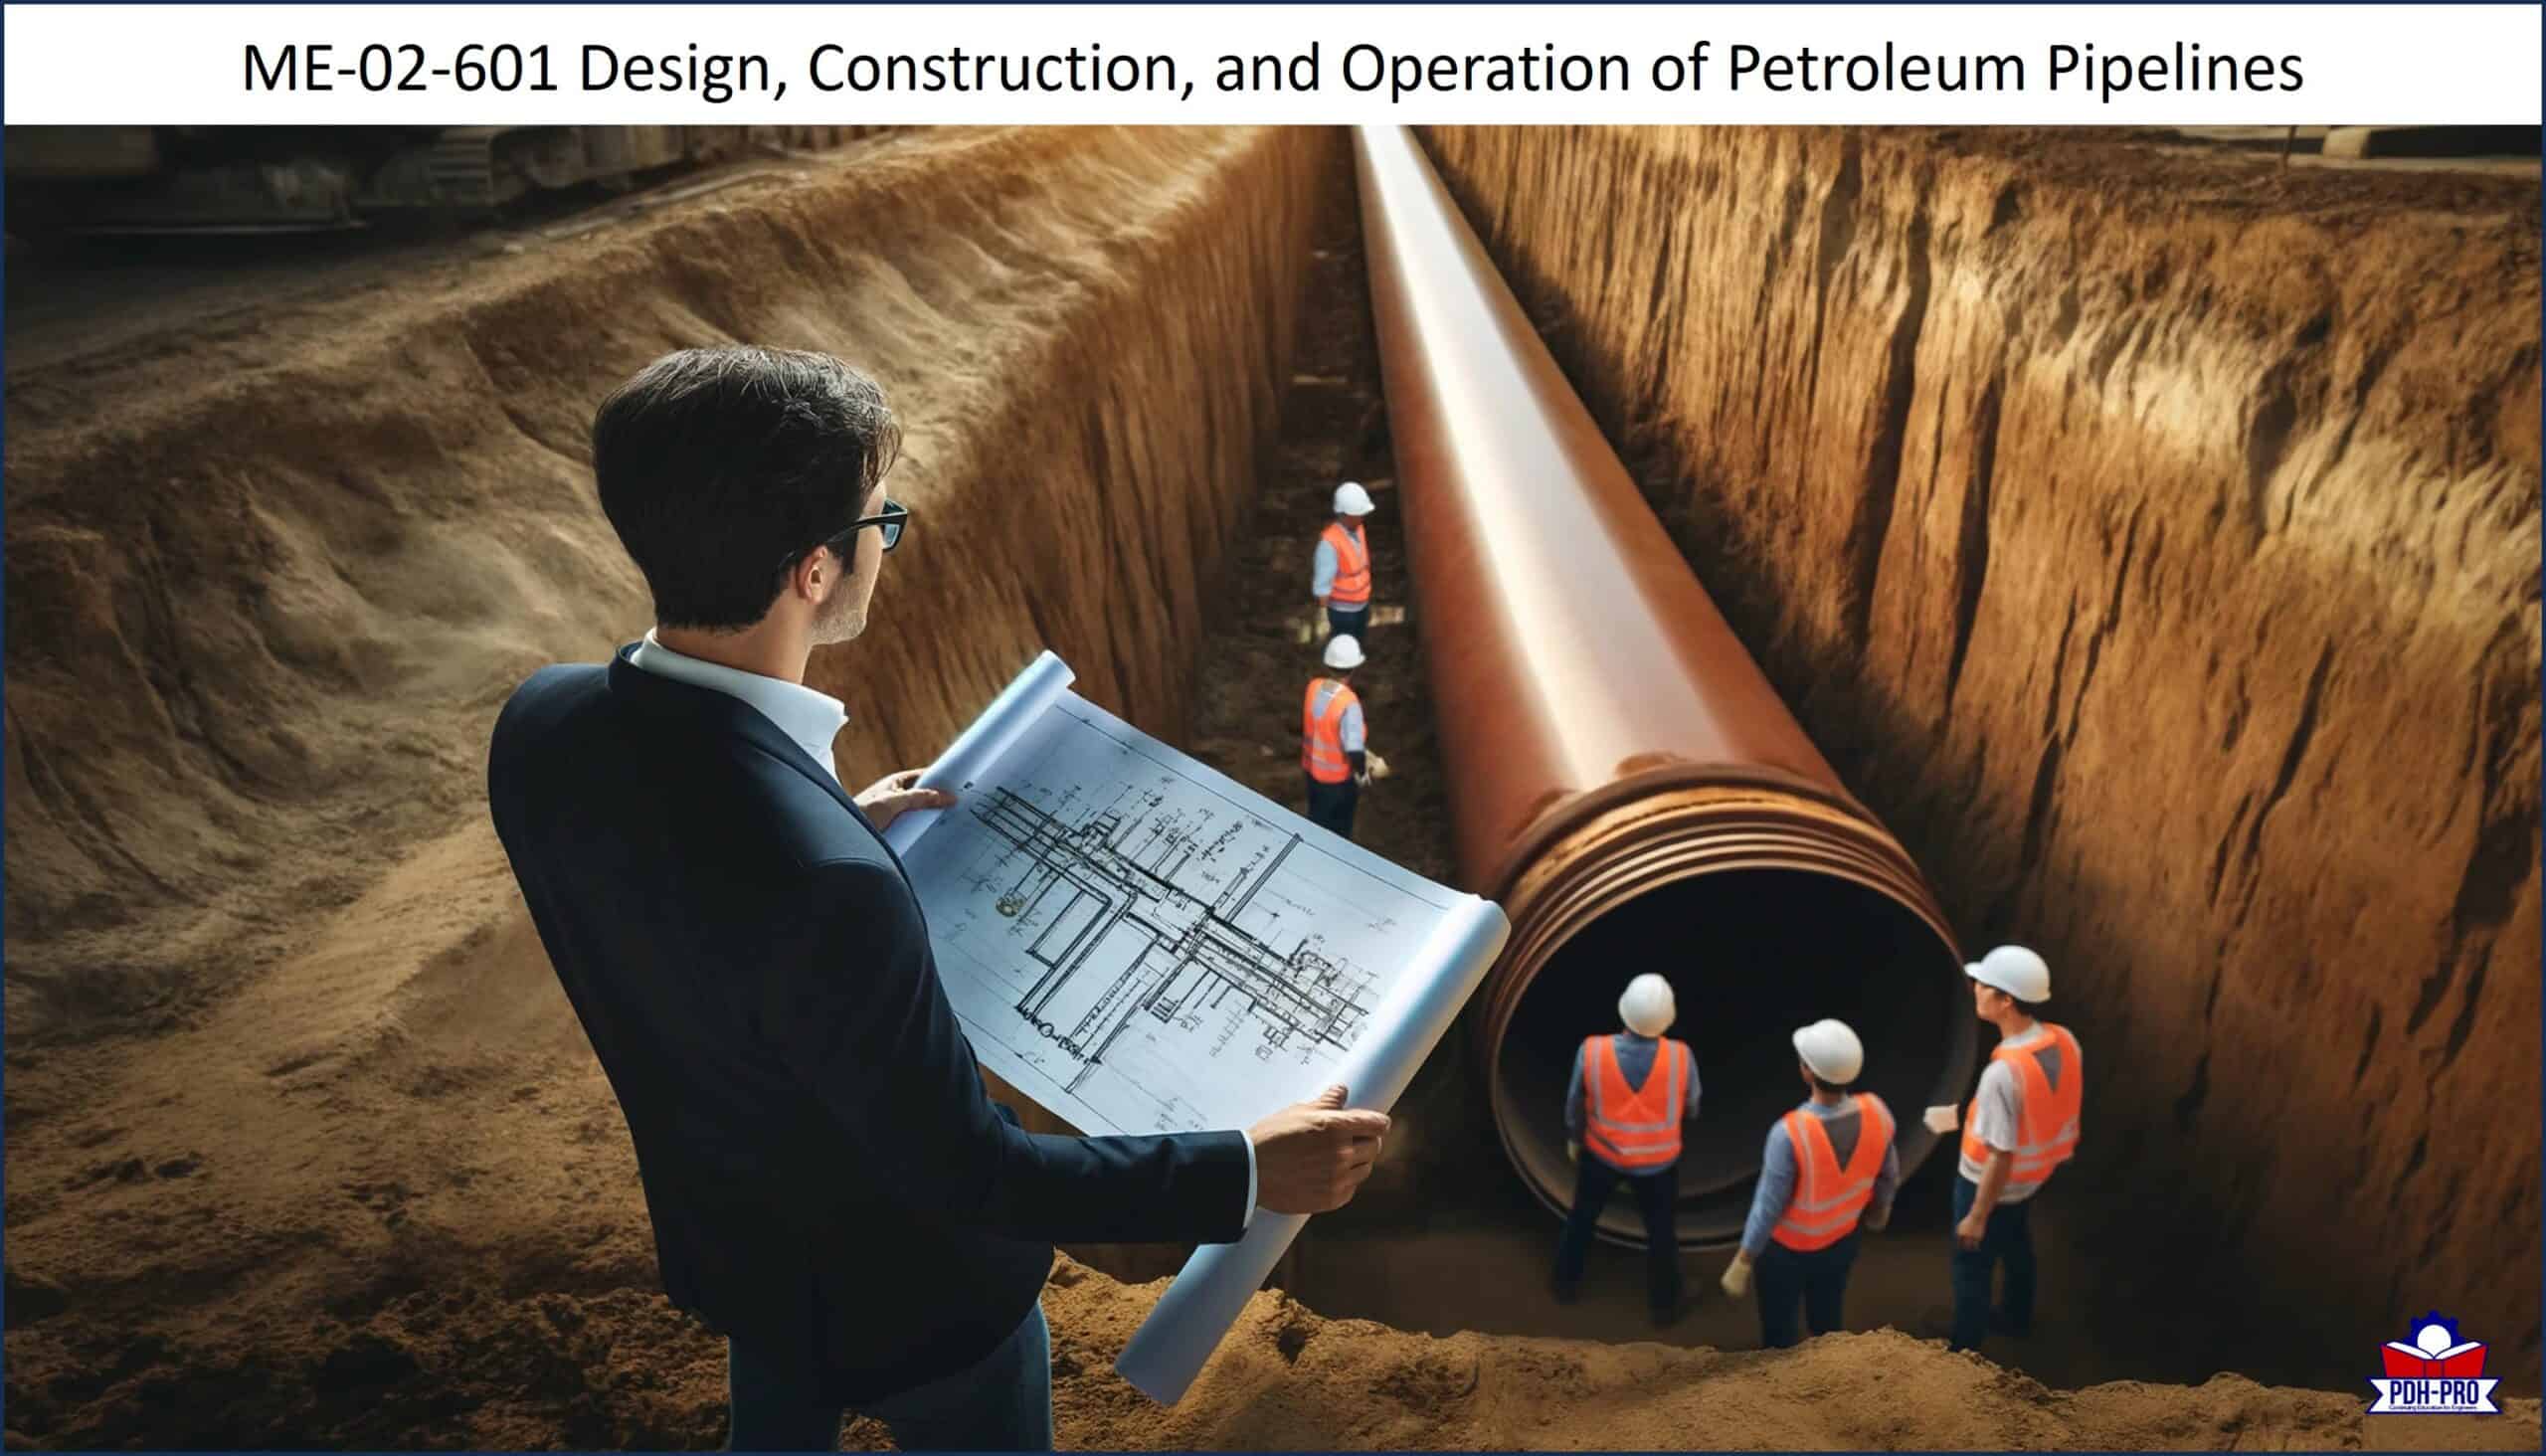 Design, Construction, and Operation of Petroleum Pipelines